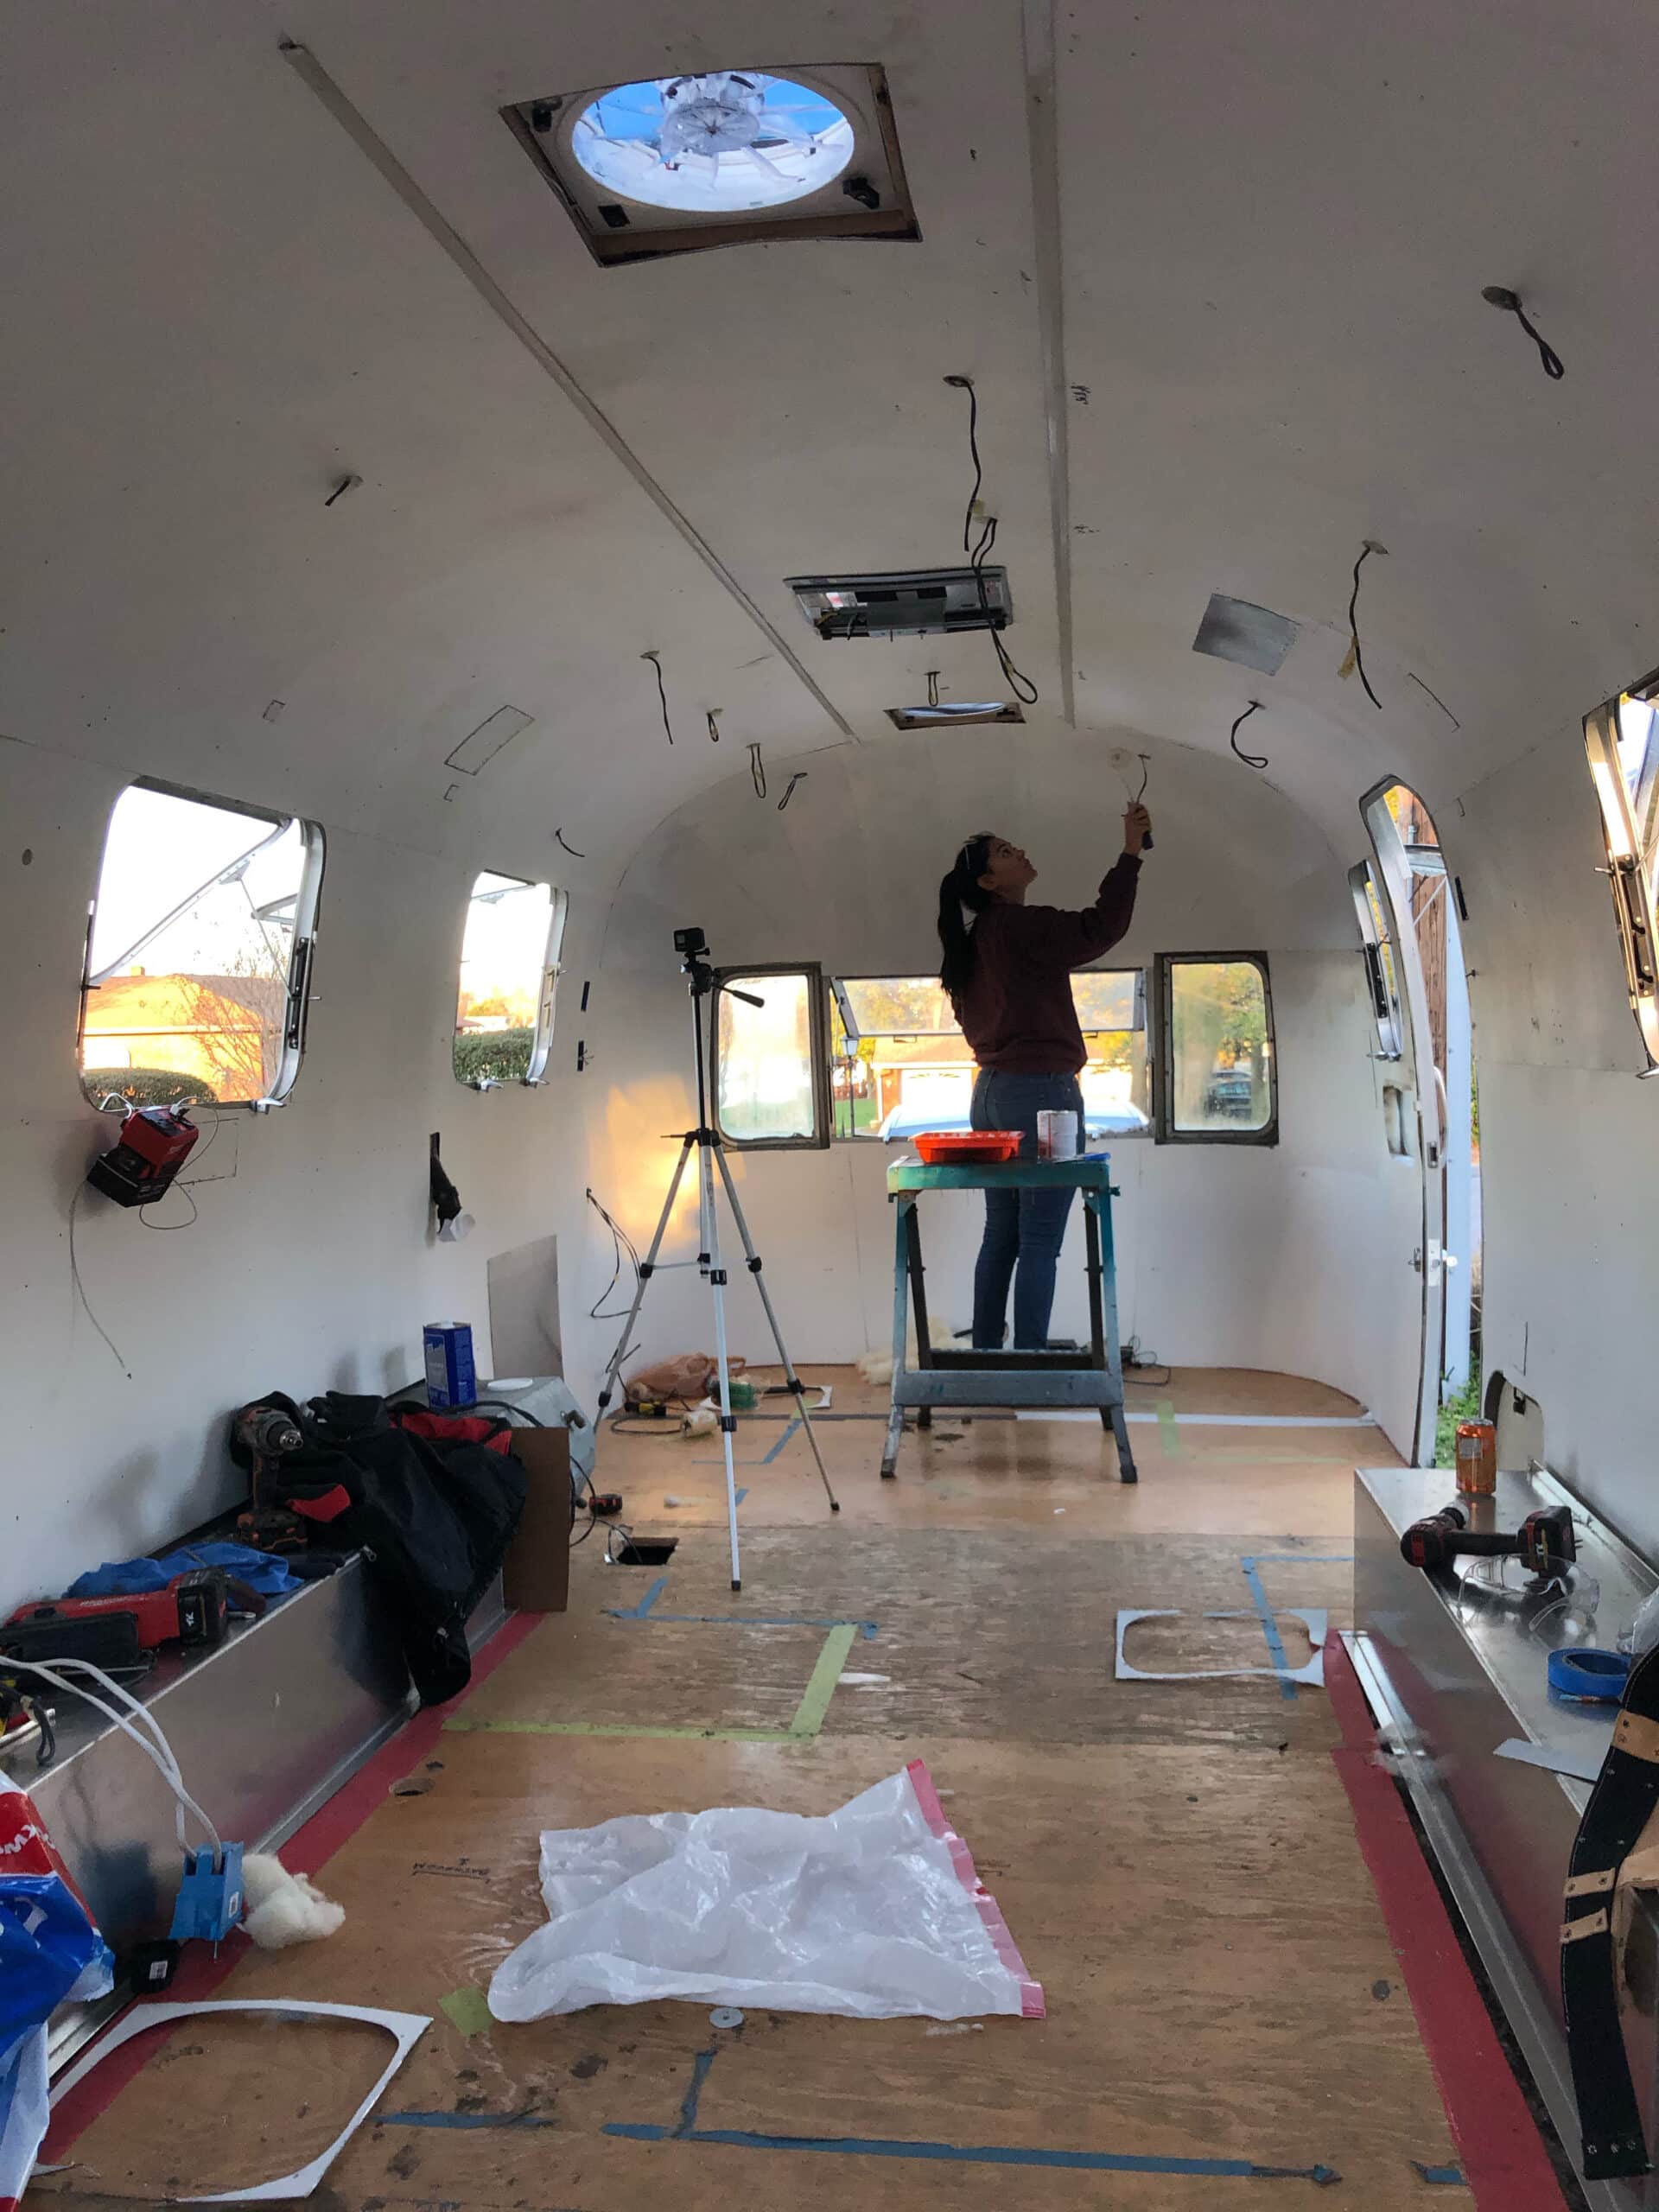 Danielle Painting the Interior Aluminum of Their Airstream While Renovating